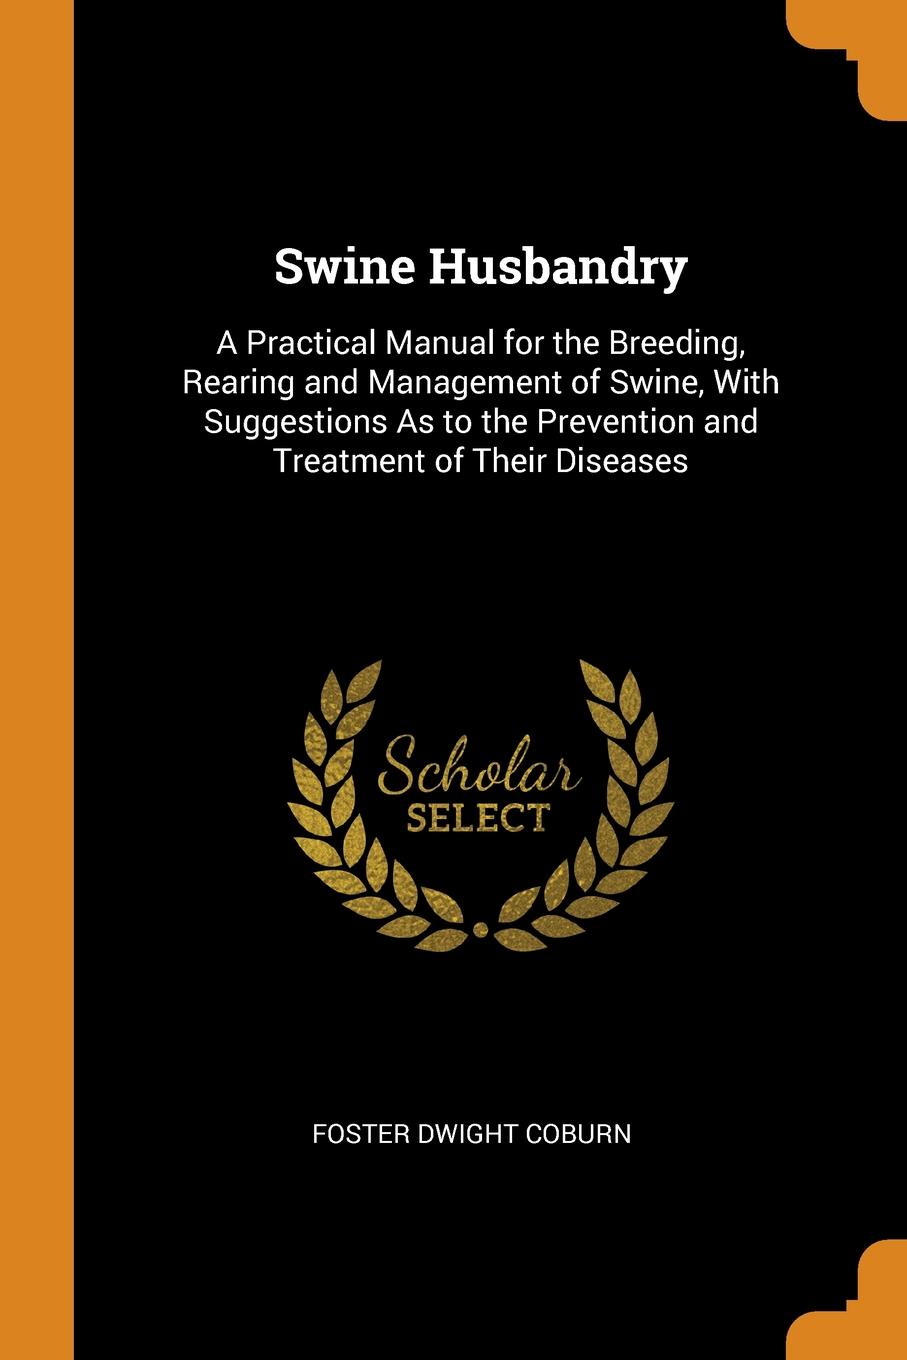 Swine Husbandry. A Practical Manual for the Breeding, Rearing and Management of Swine, With Suggestions As to the Prevention and Treatment of Their Diseases